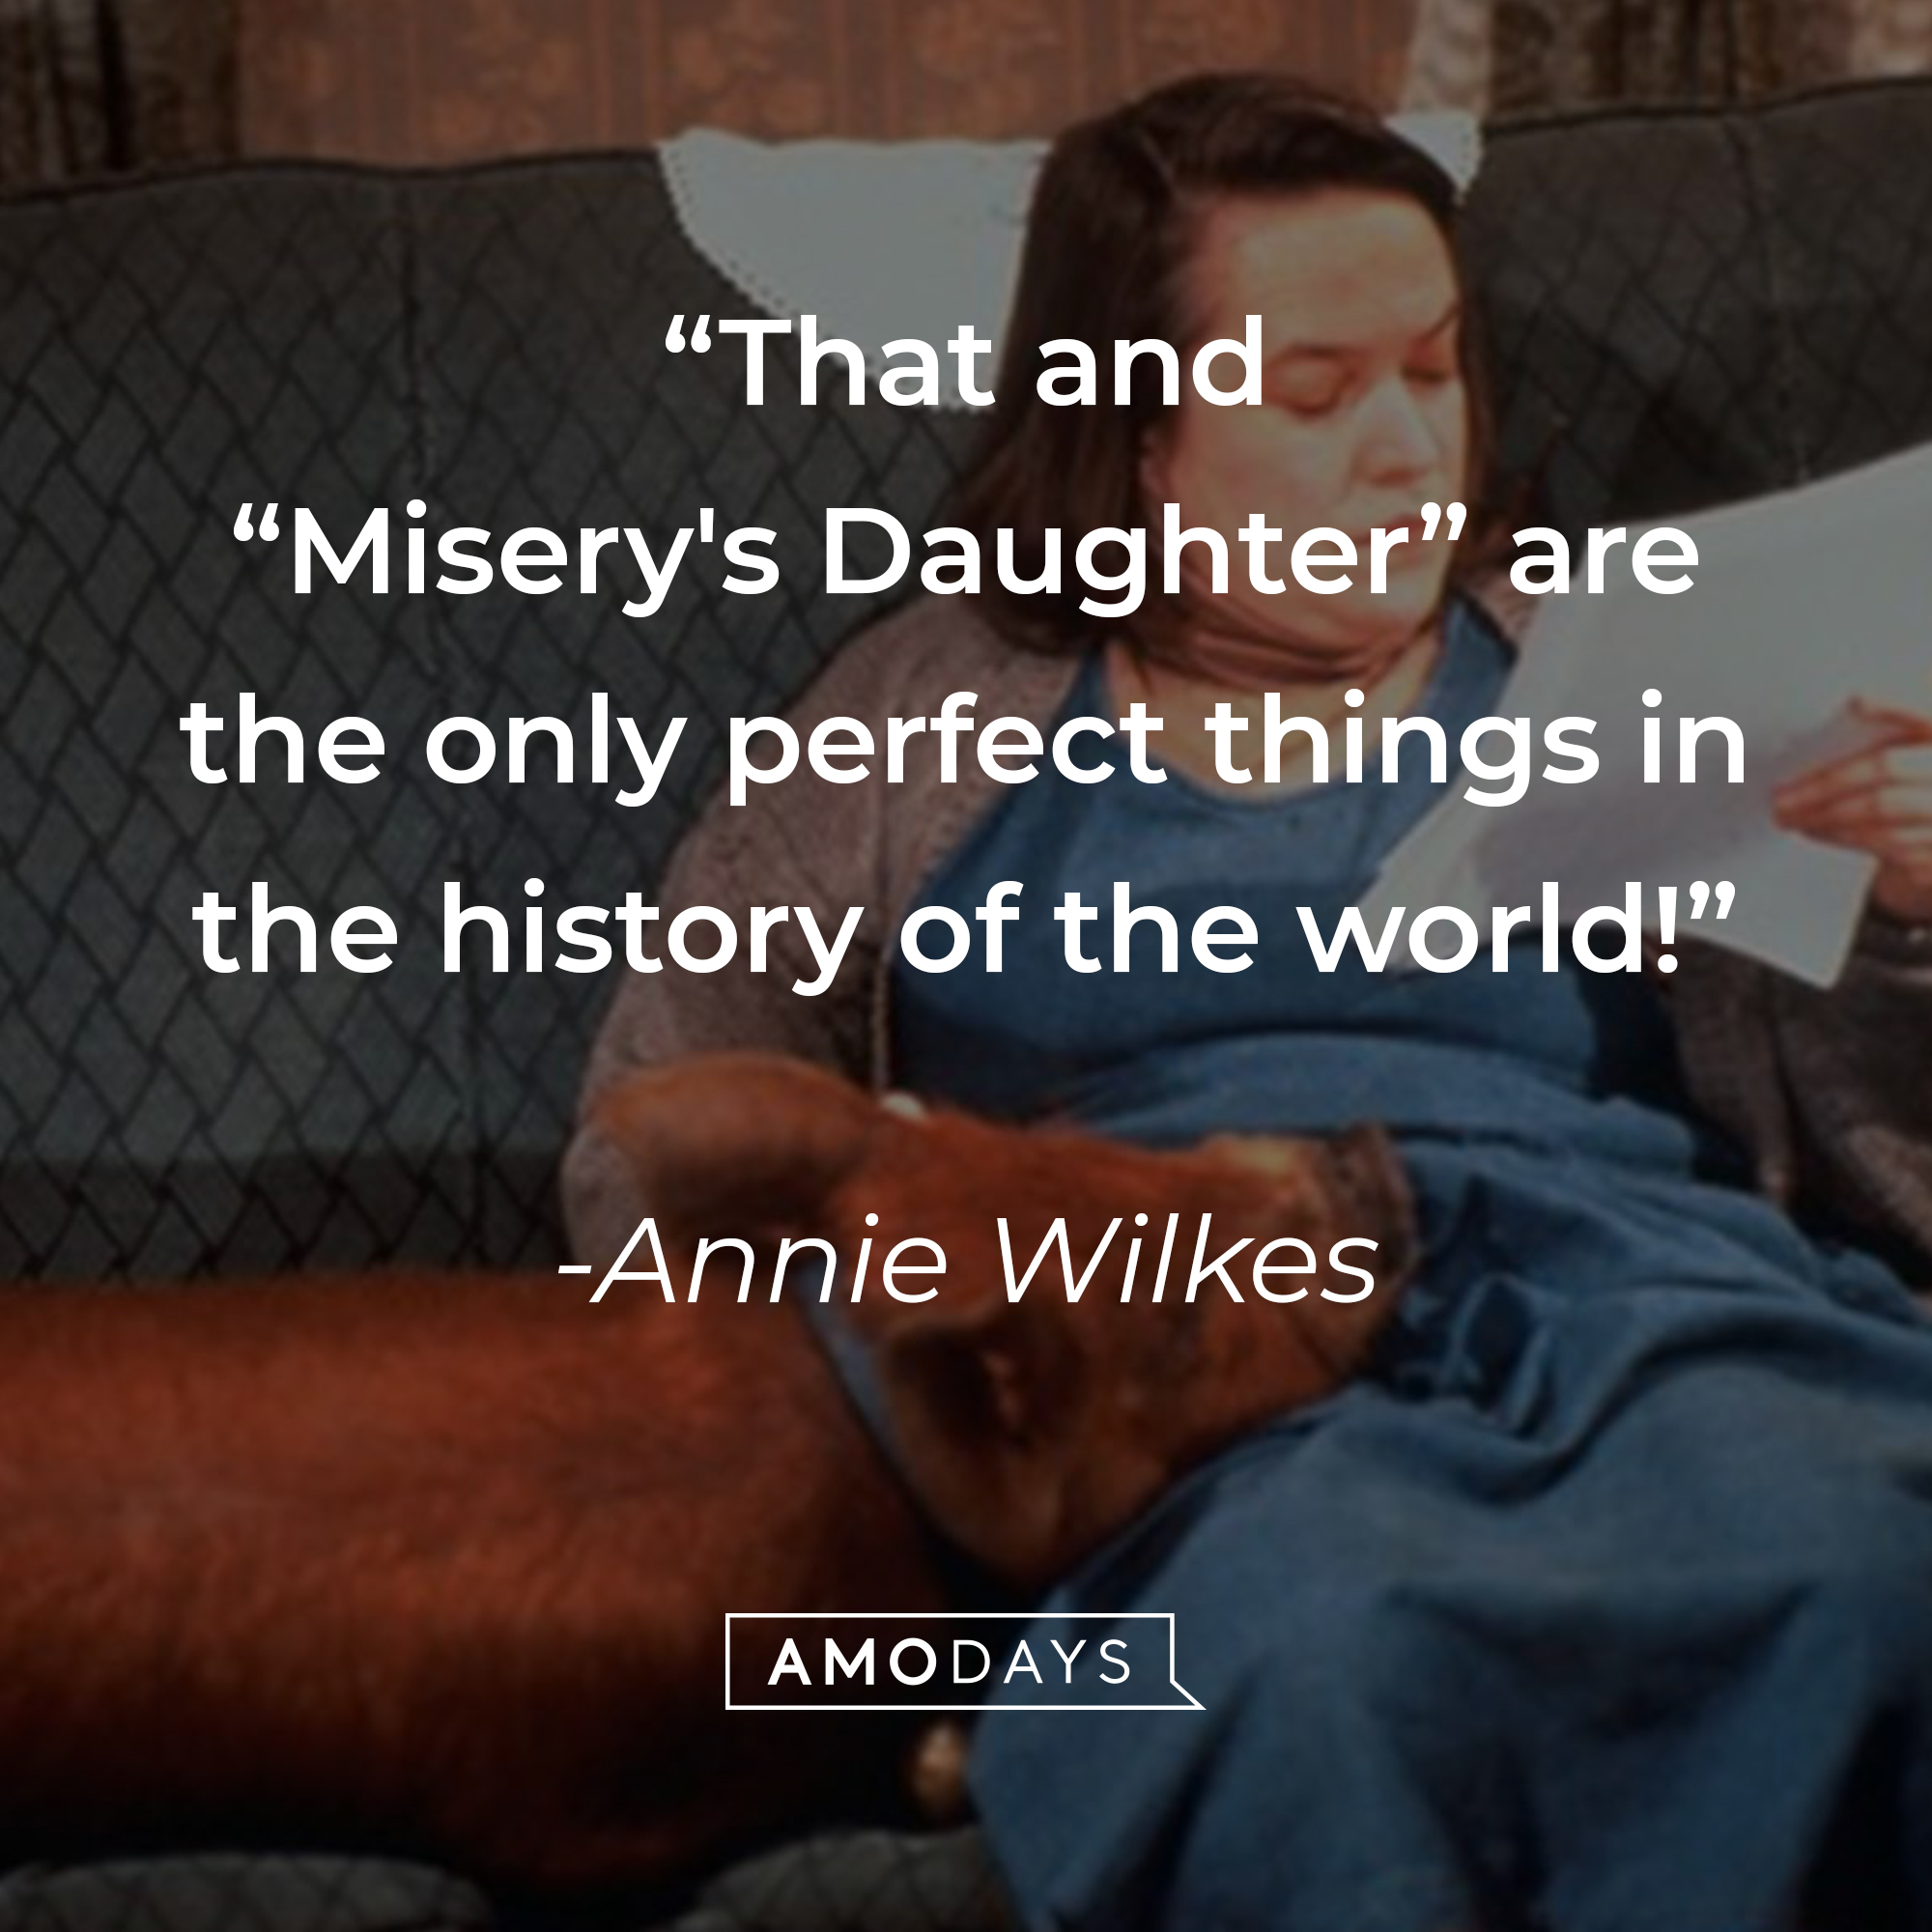 Annie Wilkes' quote: “That and "Misery's Daughter" are the only perfect things in the history of the world!” | Source: facebook.com/MiseryMovie